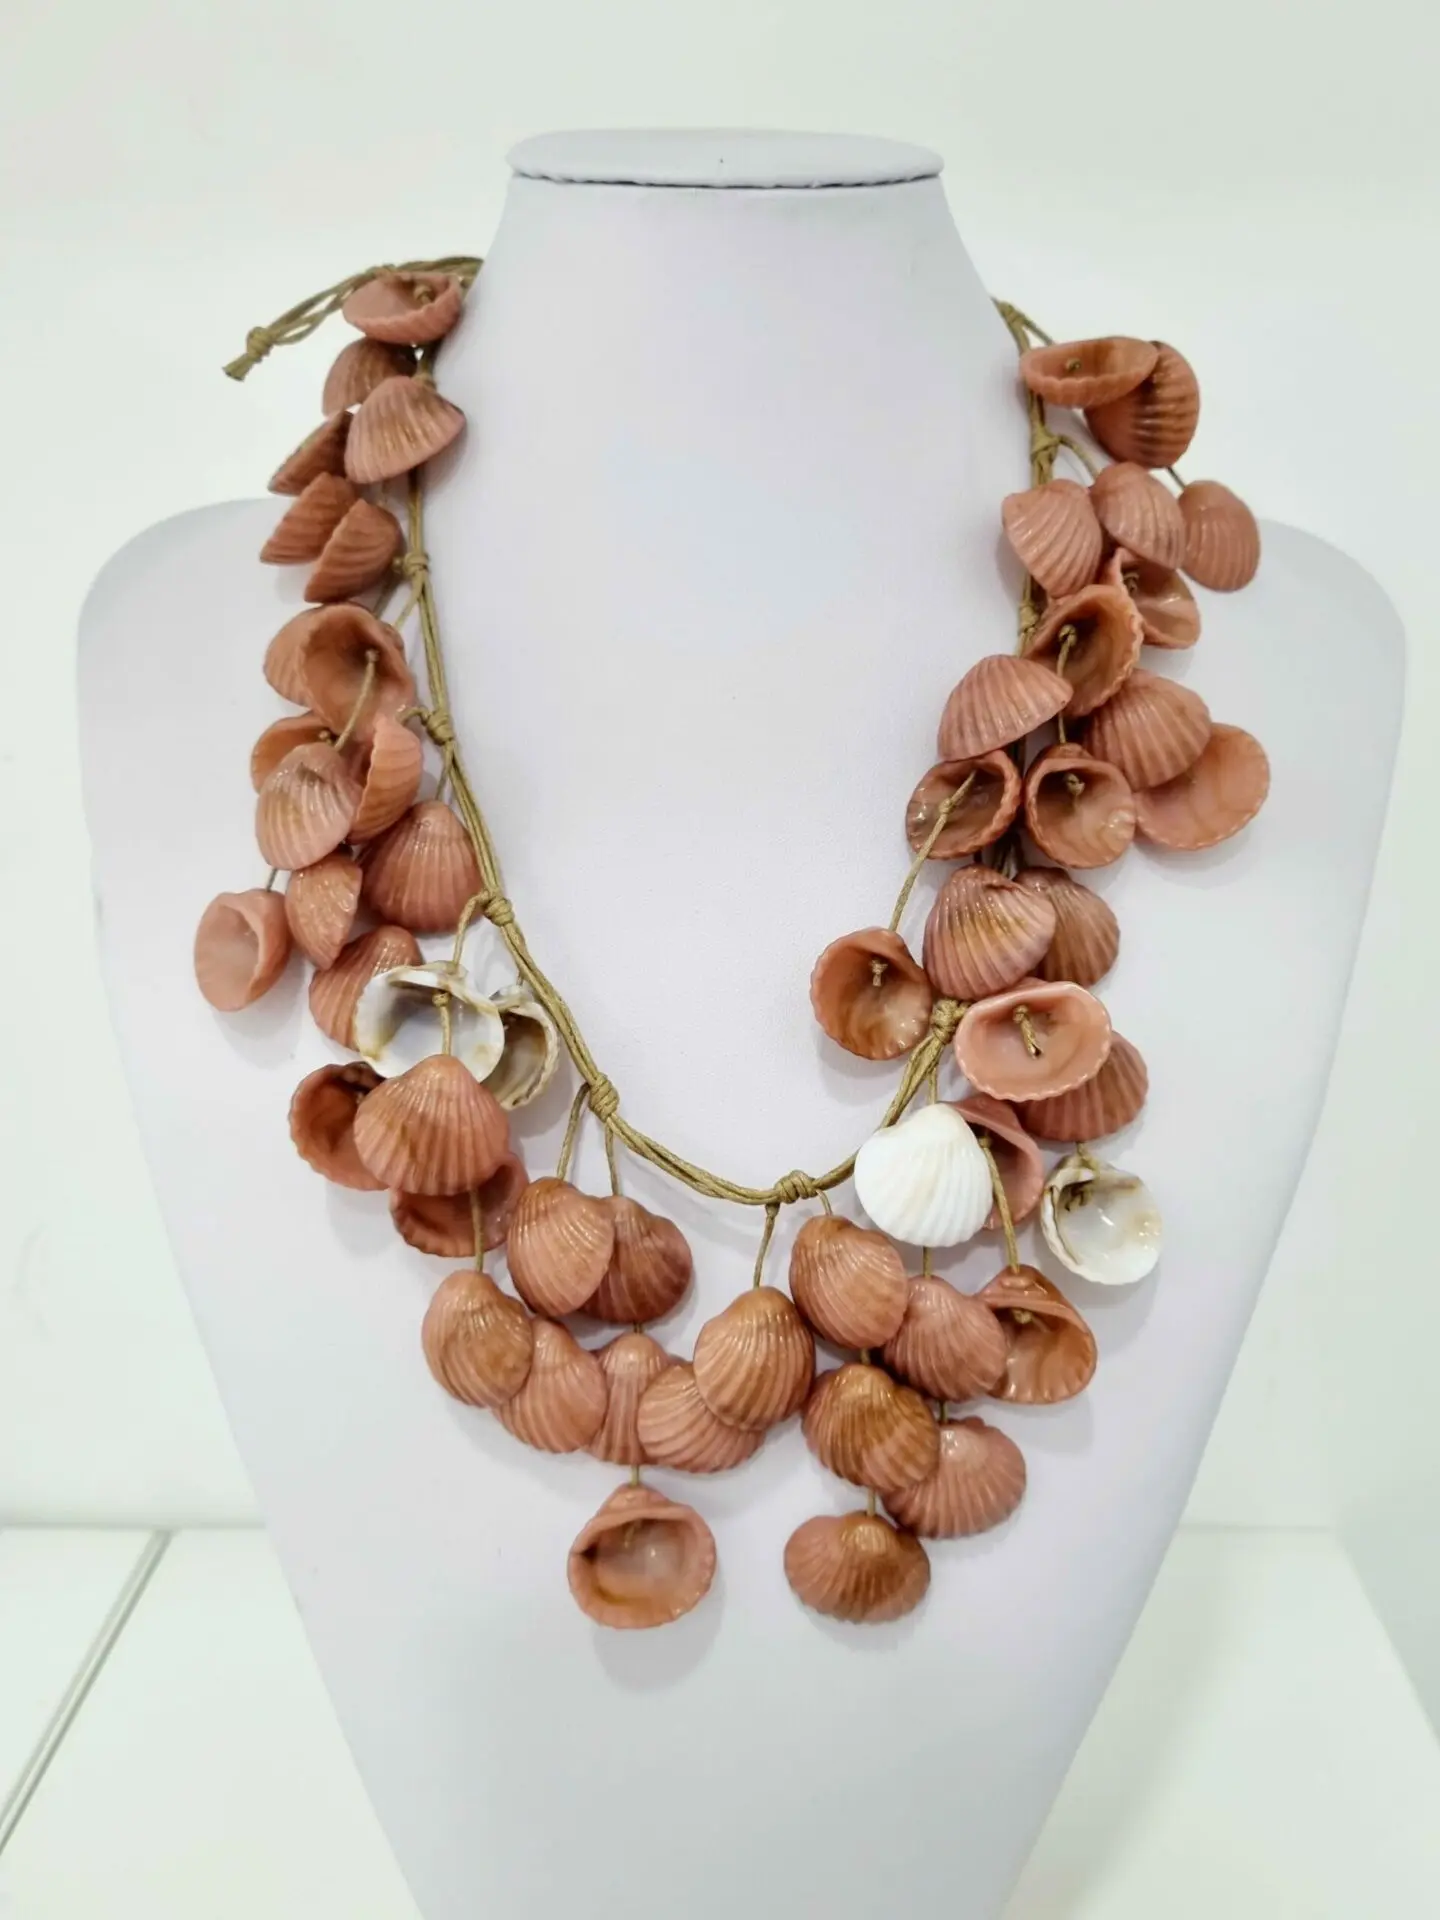 Necklace made with pink and white resin shells on cord. Button closure. Adjustable length 60 cm